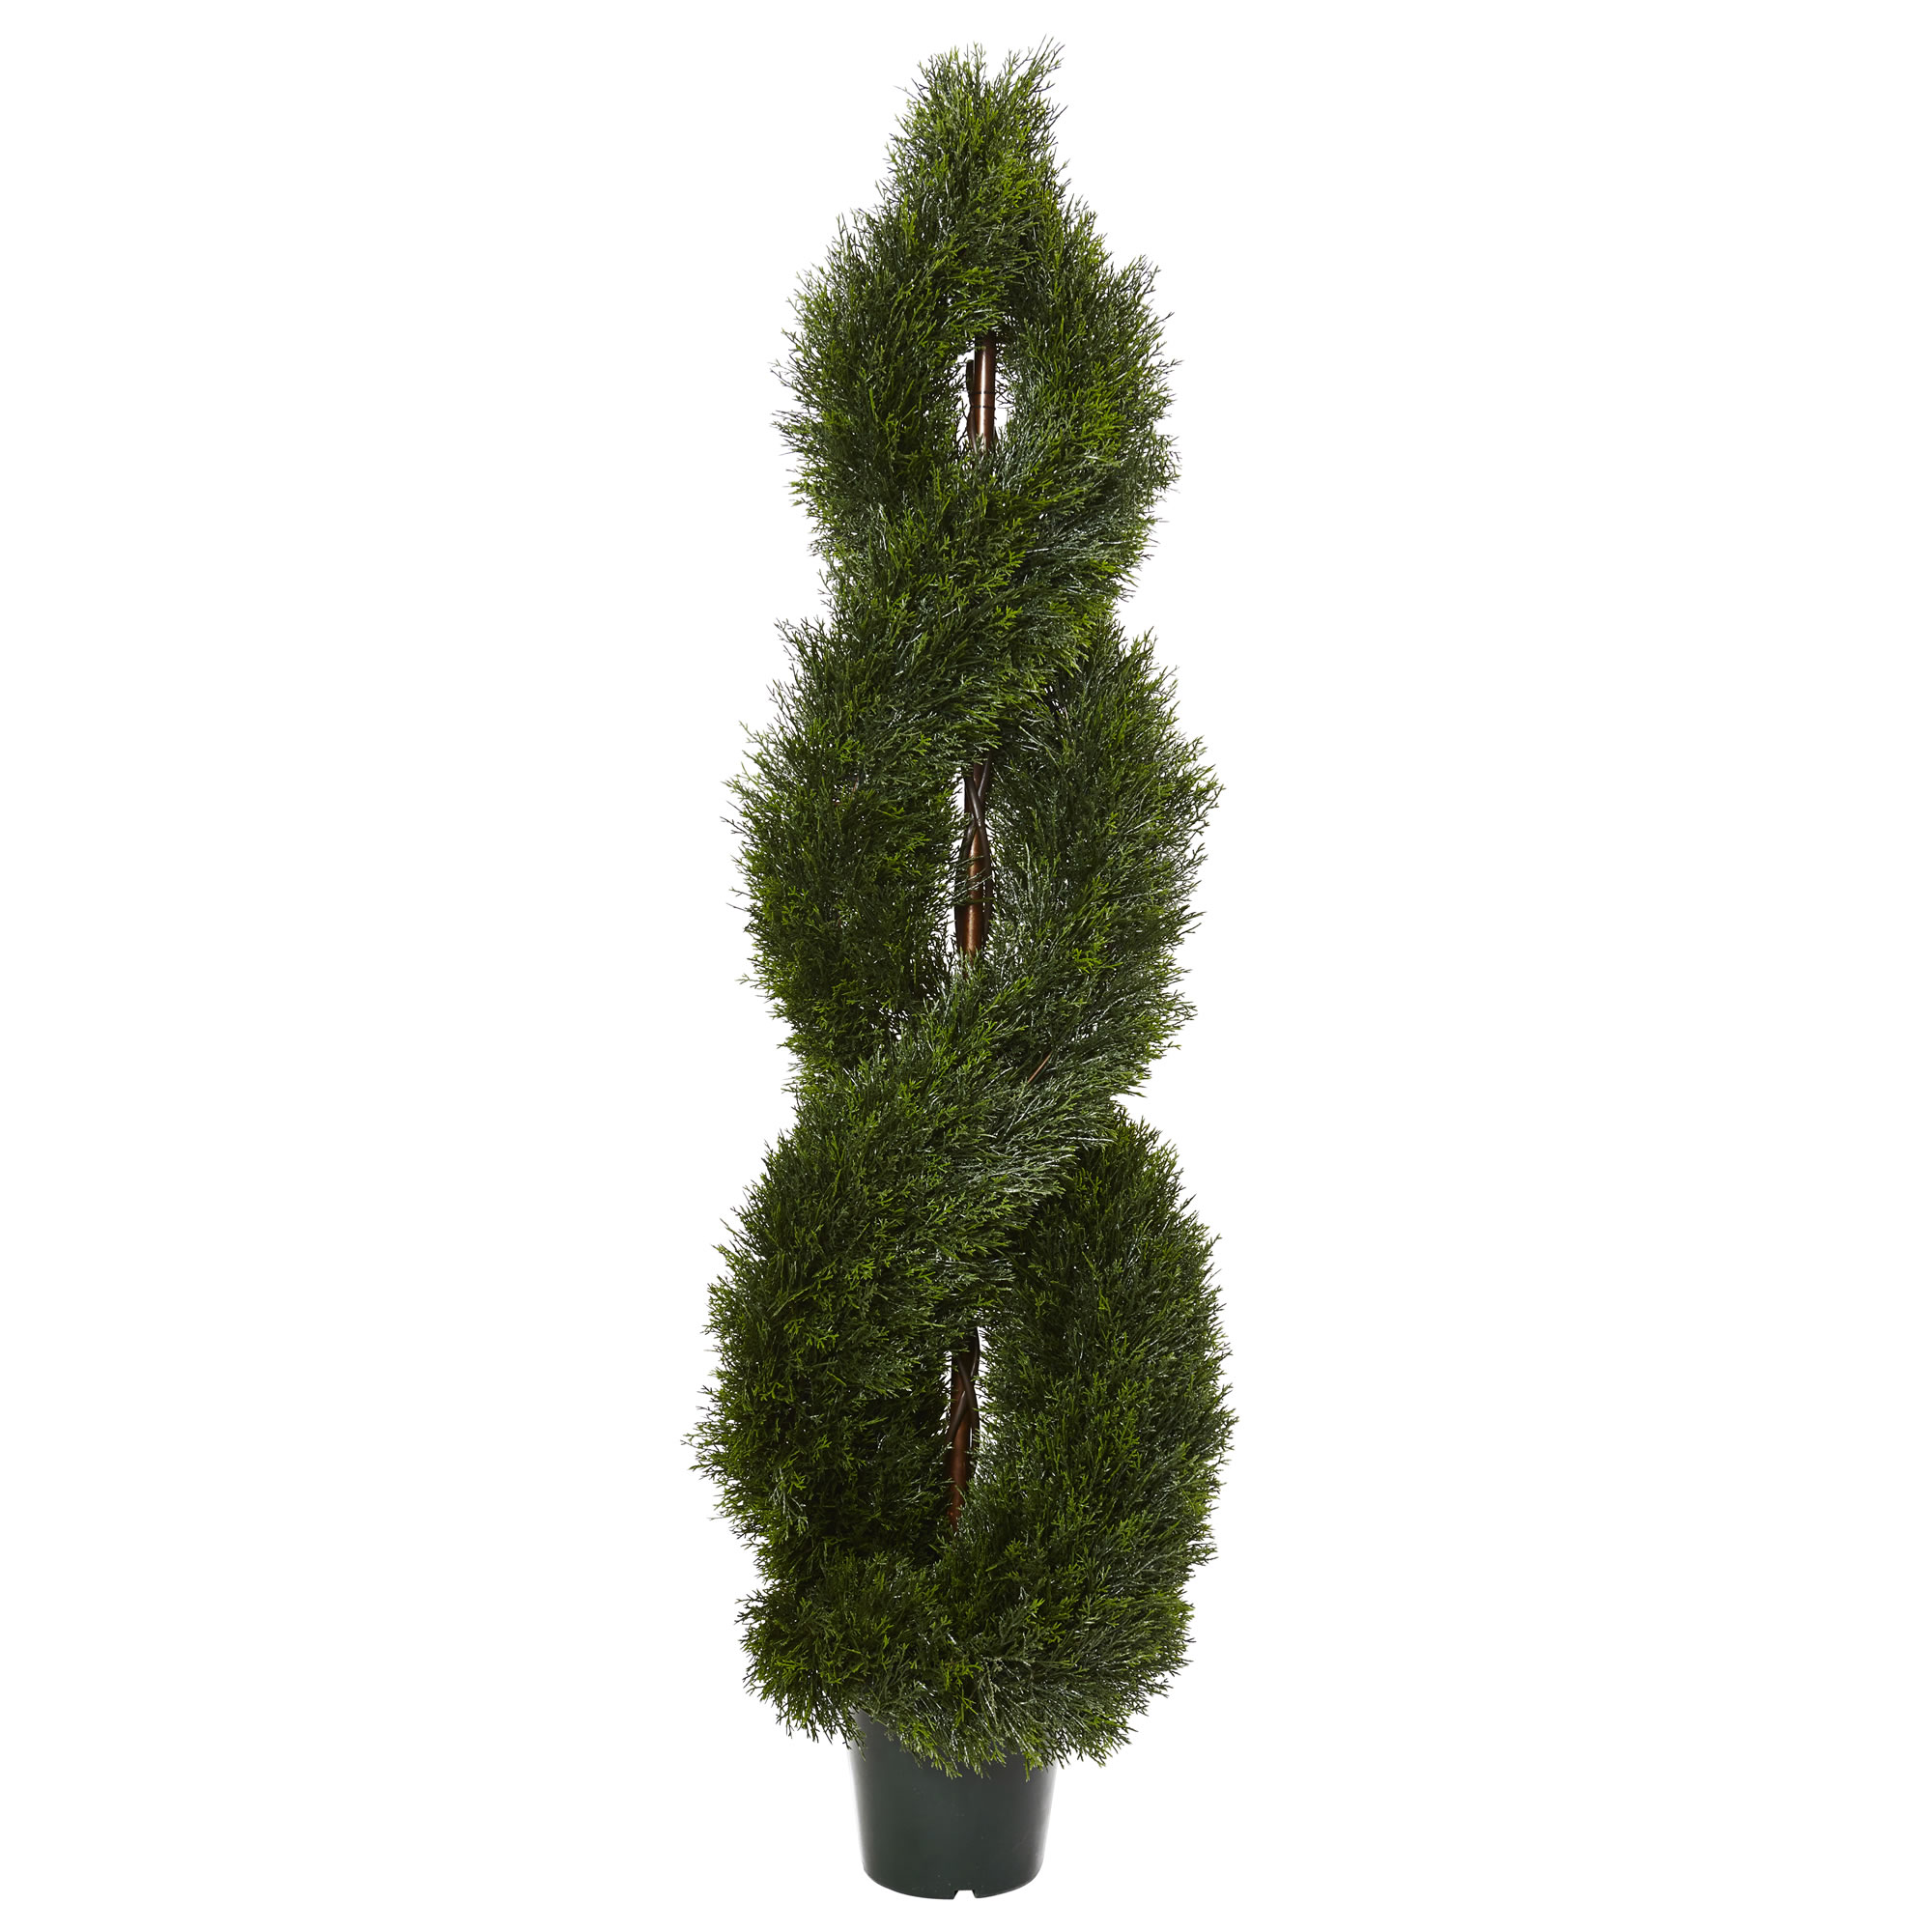 5 Foot Pond Cypress Spiral Topiary: Uv Protected